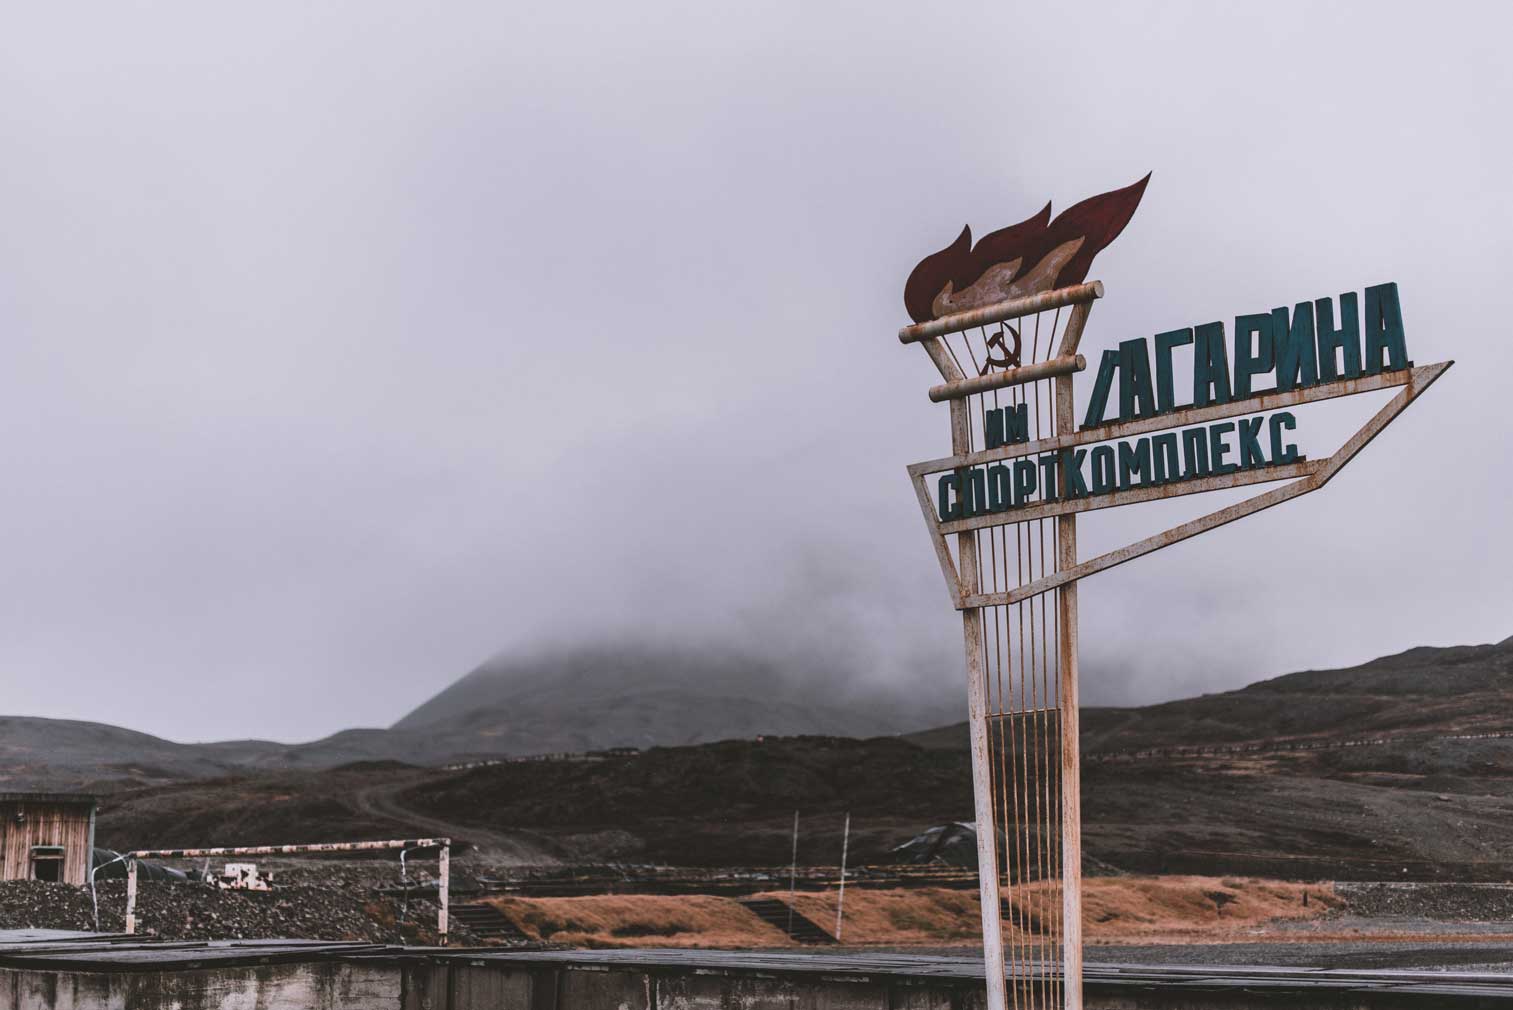 Tour the eerie abandoned mining town of Pyramiden